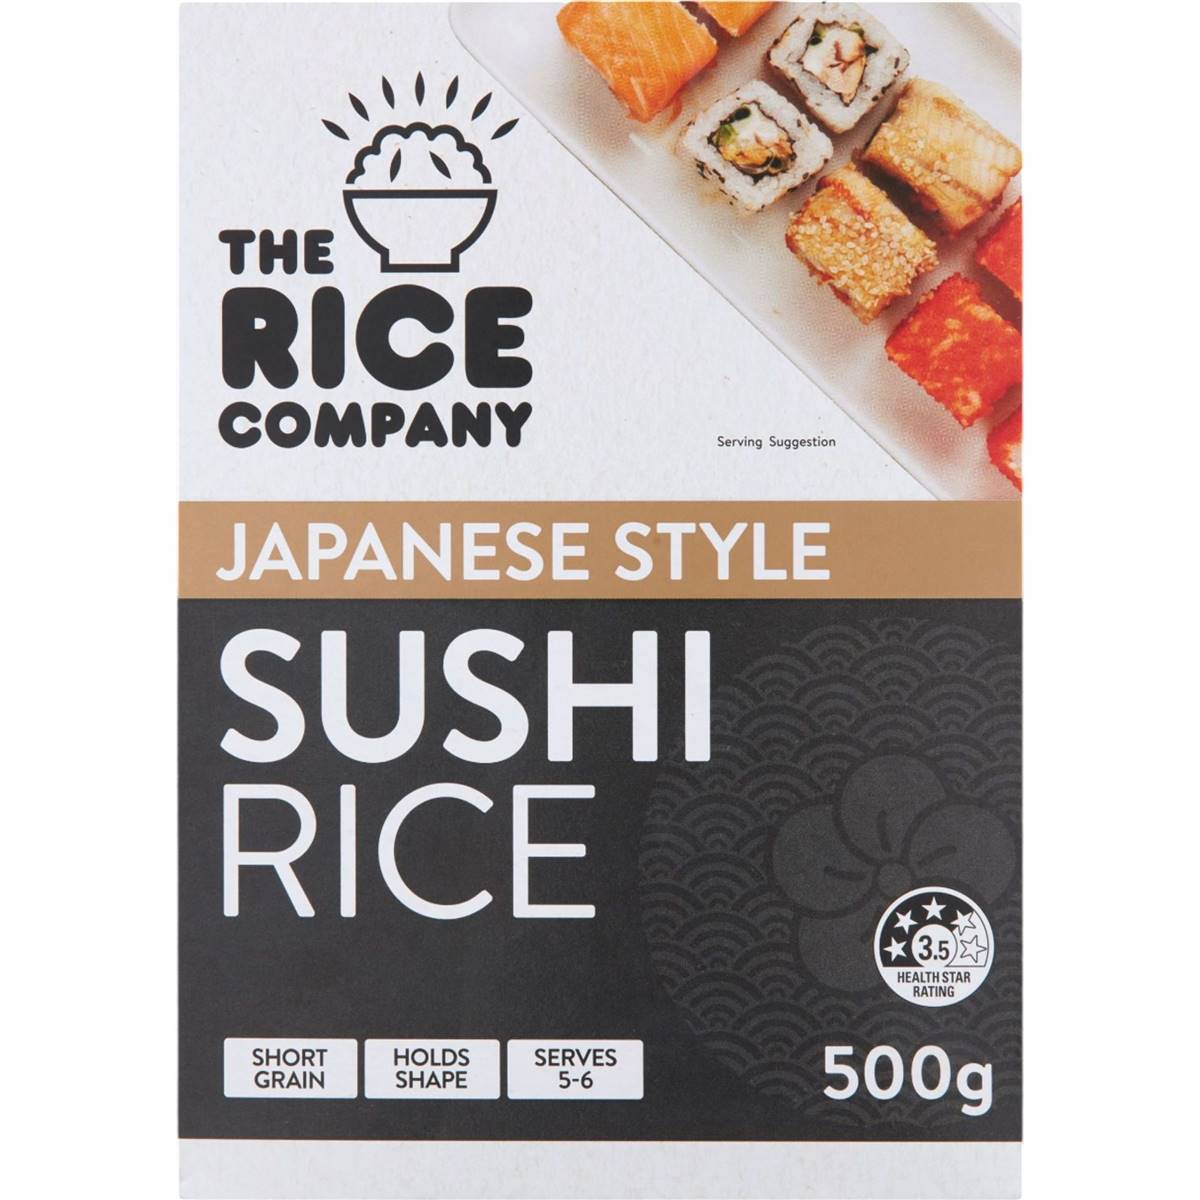 Calories in Trc Japanese Sushi Rice 500g The Rice Company Japanese Sushi Rice